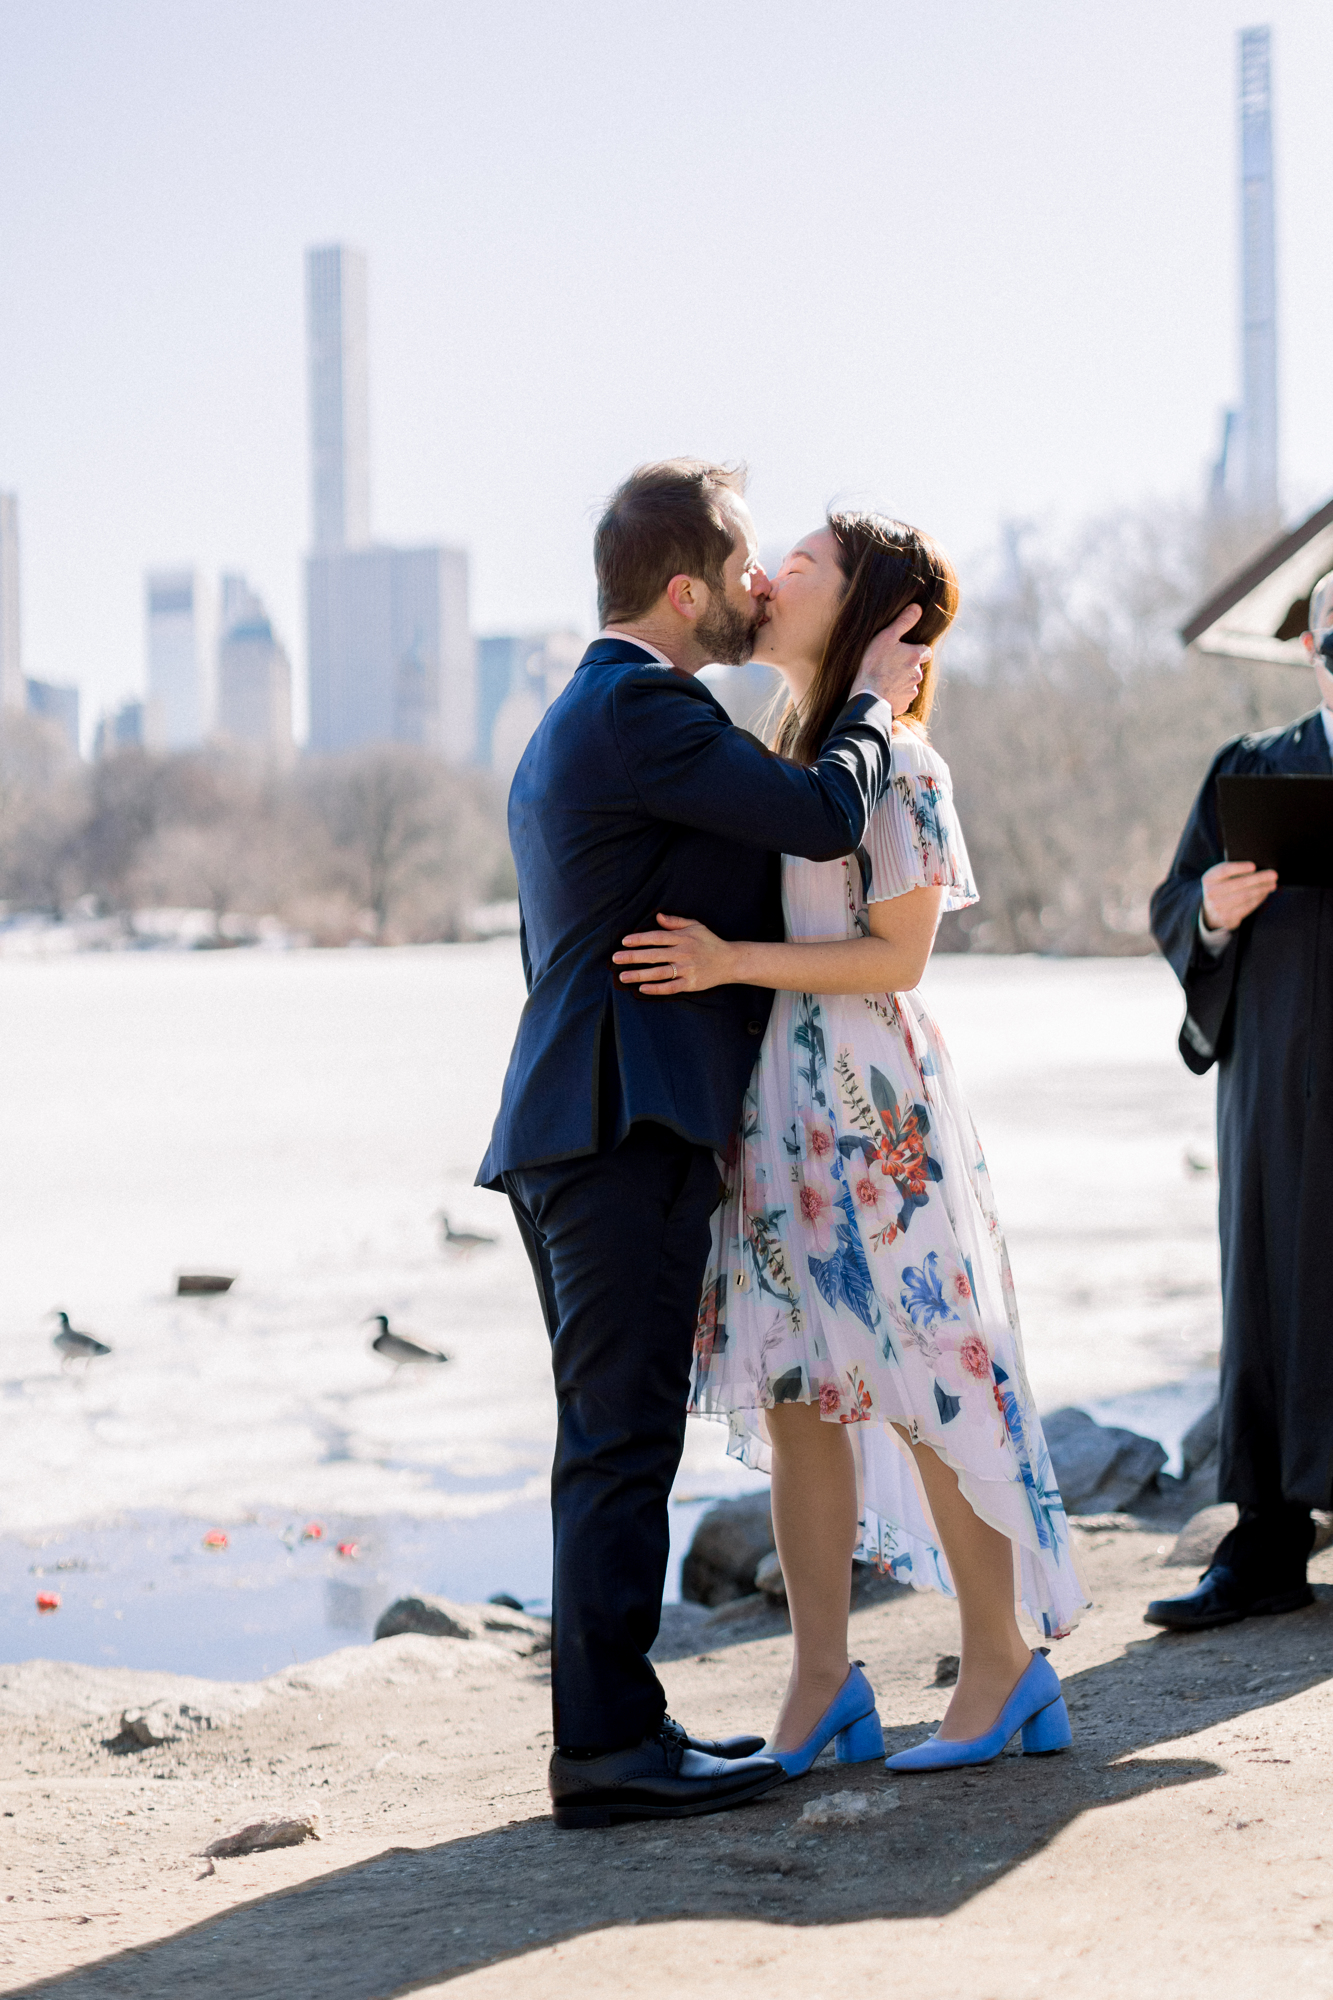 Fabulous Central Park Wedding Photos in Wintery NYC